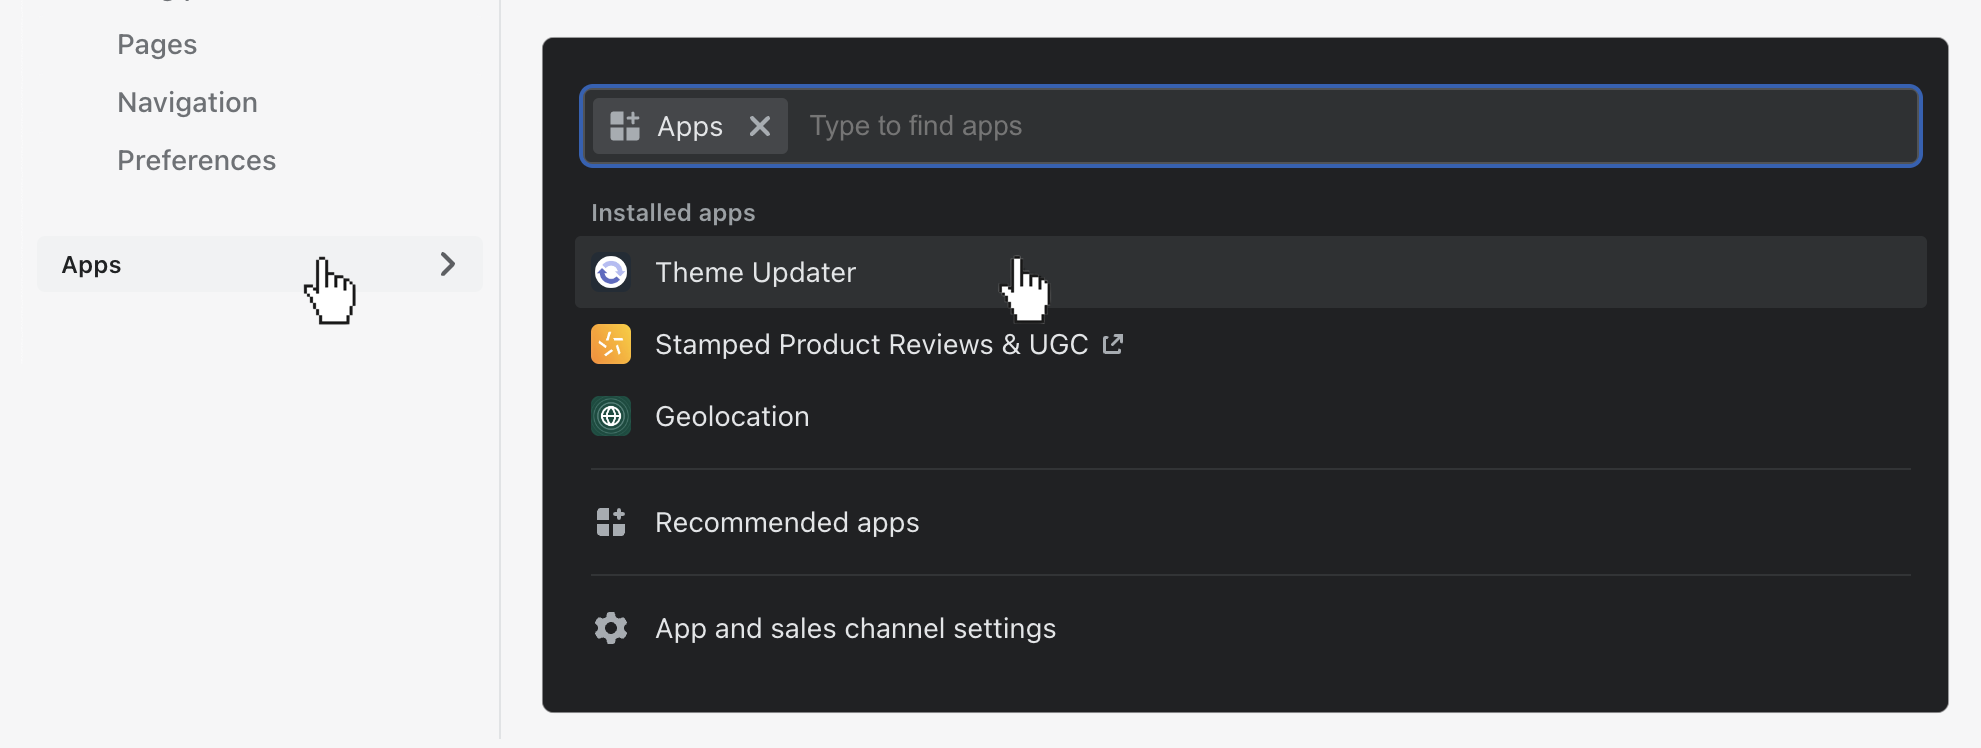 click_apps_in_left_sidebar_then_select_theme_updater.png